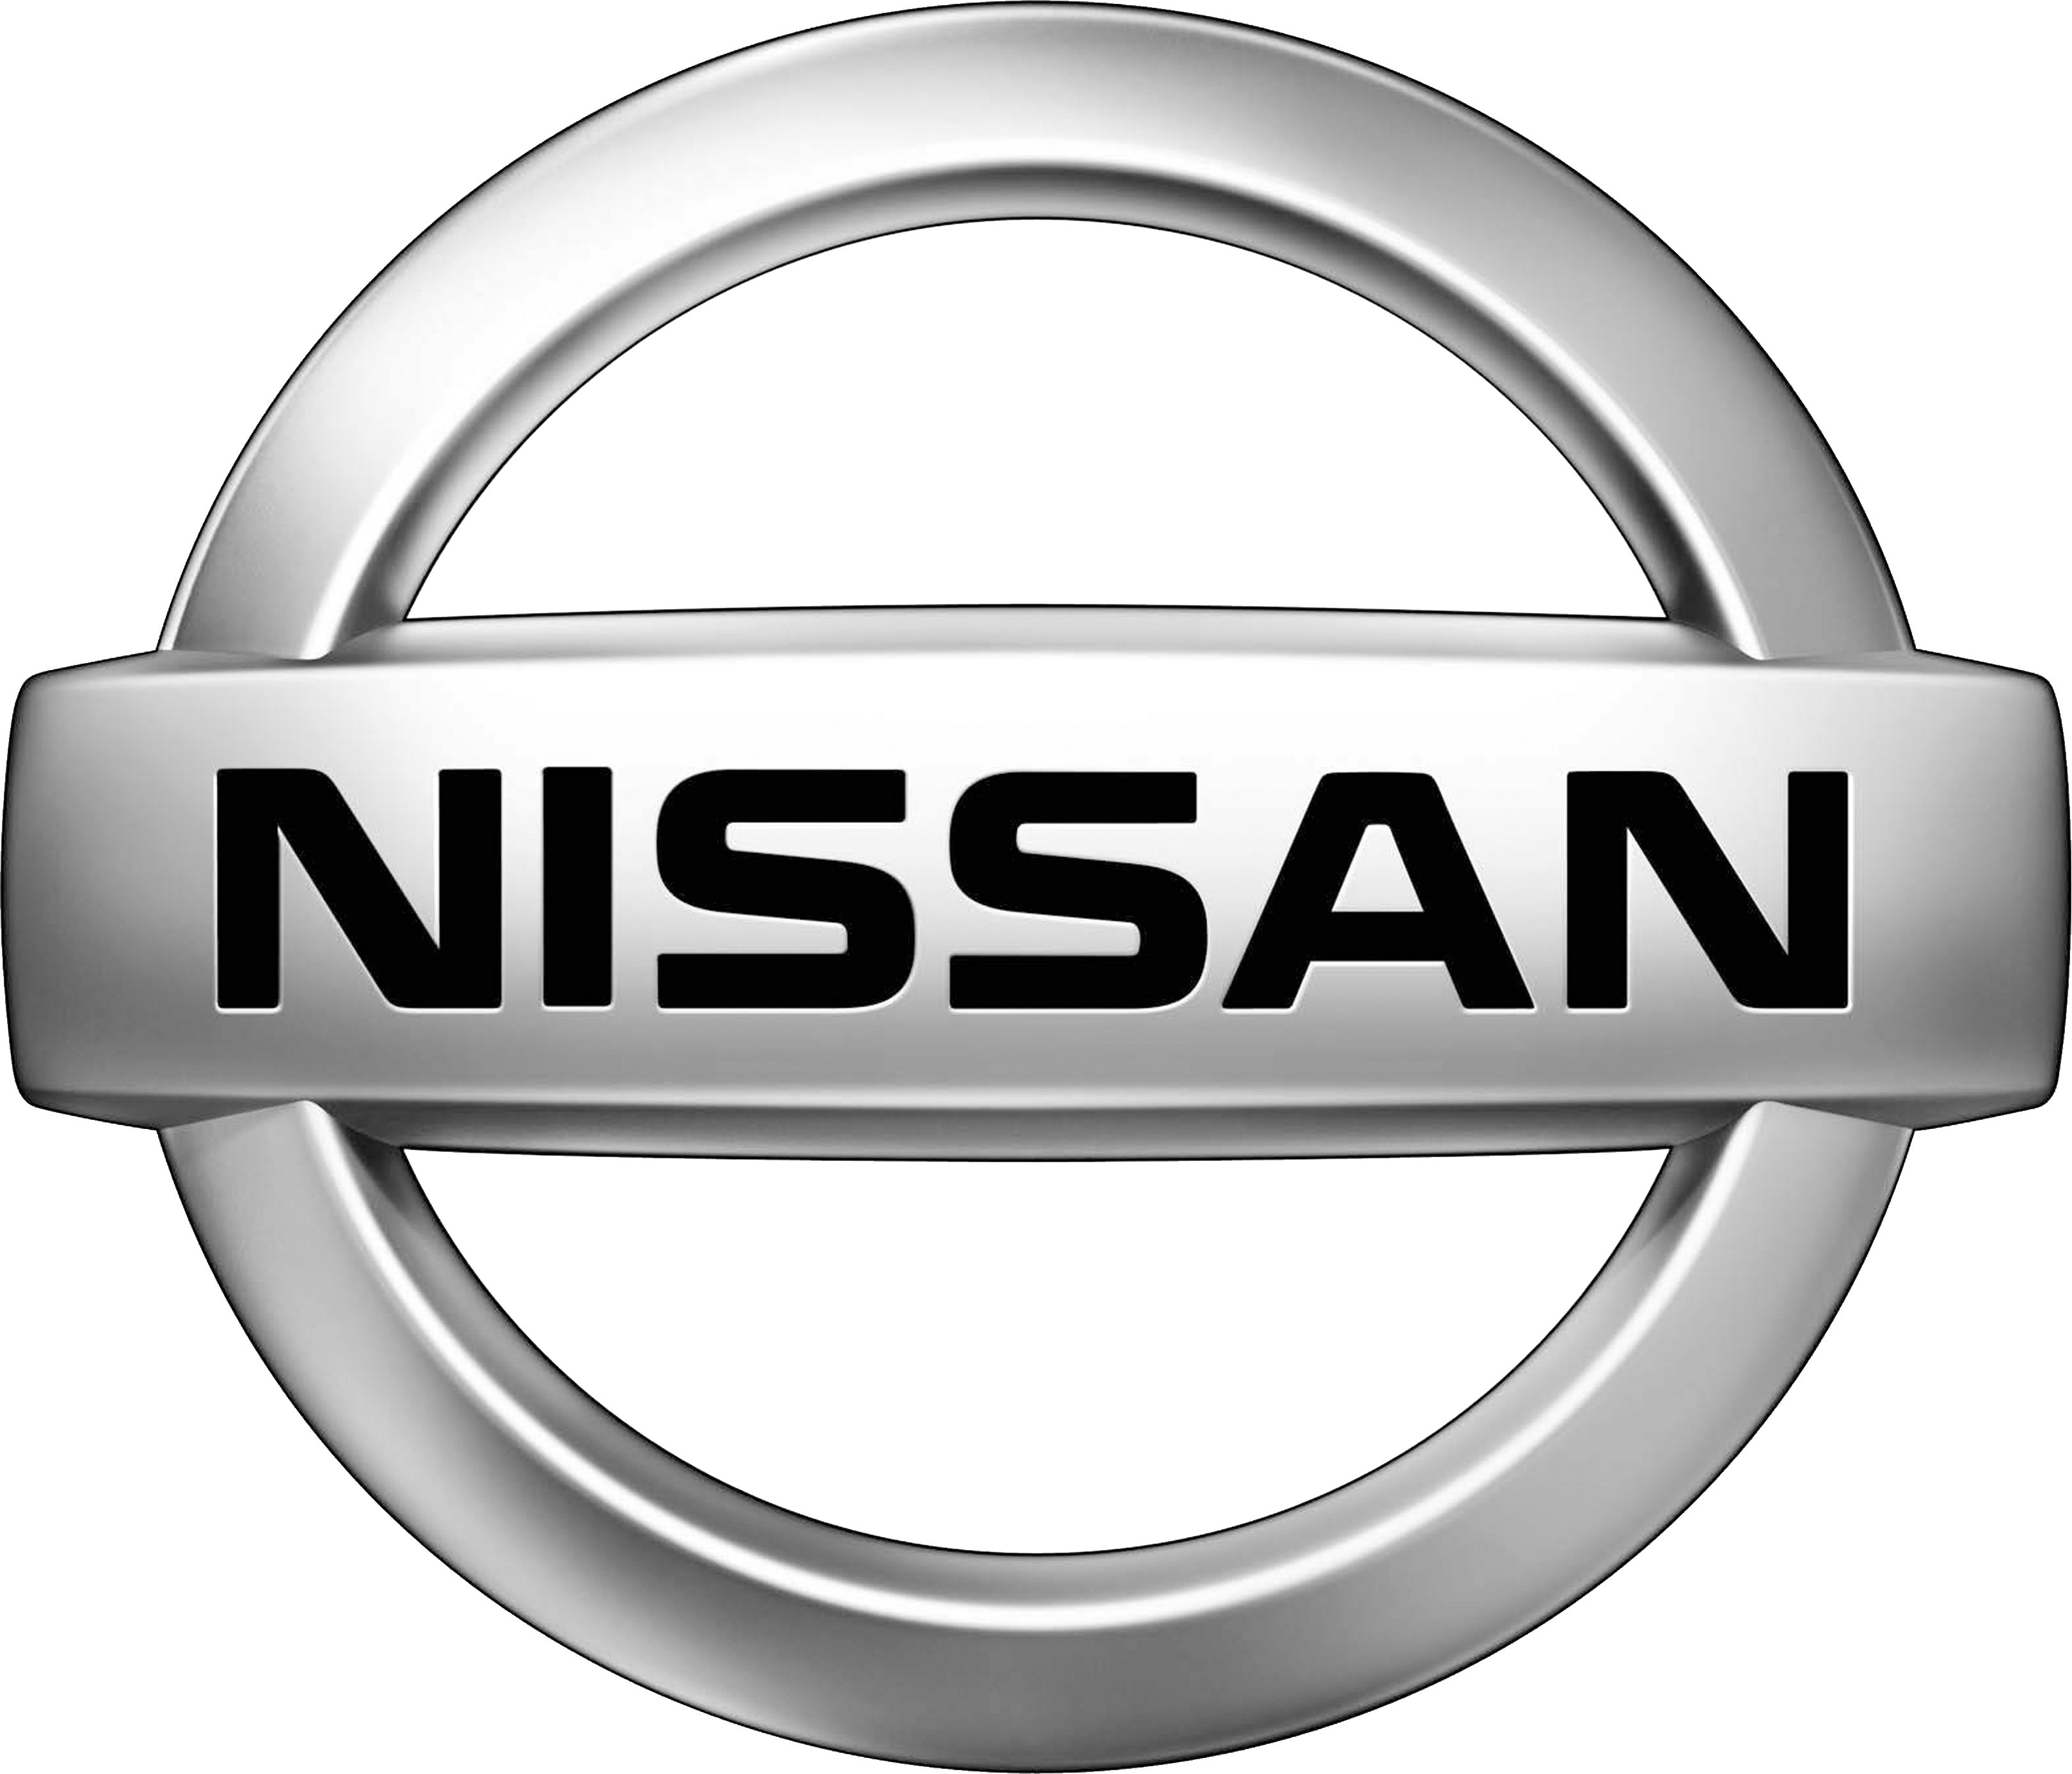 Nissan Radio Advertisement by Thierry Legrand